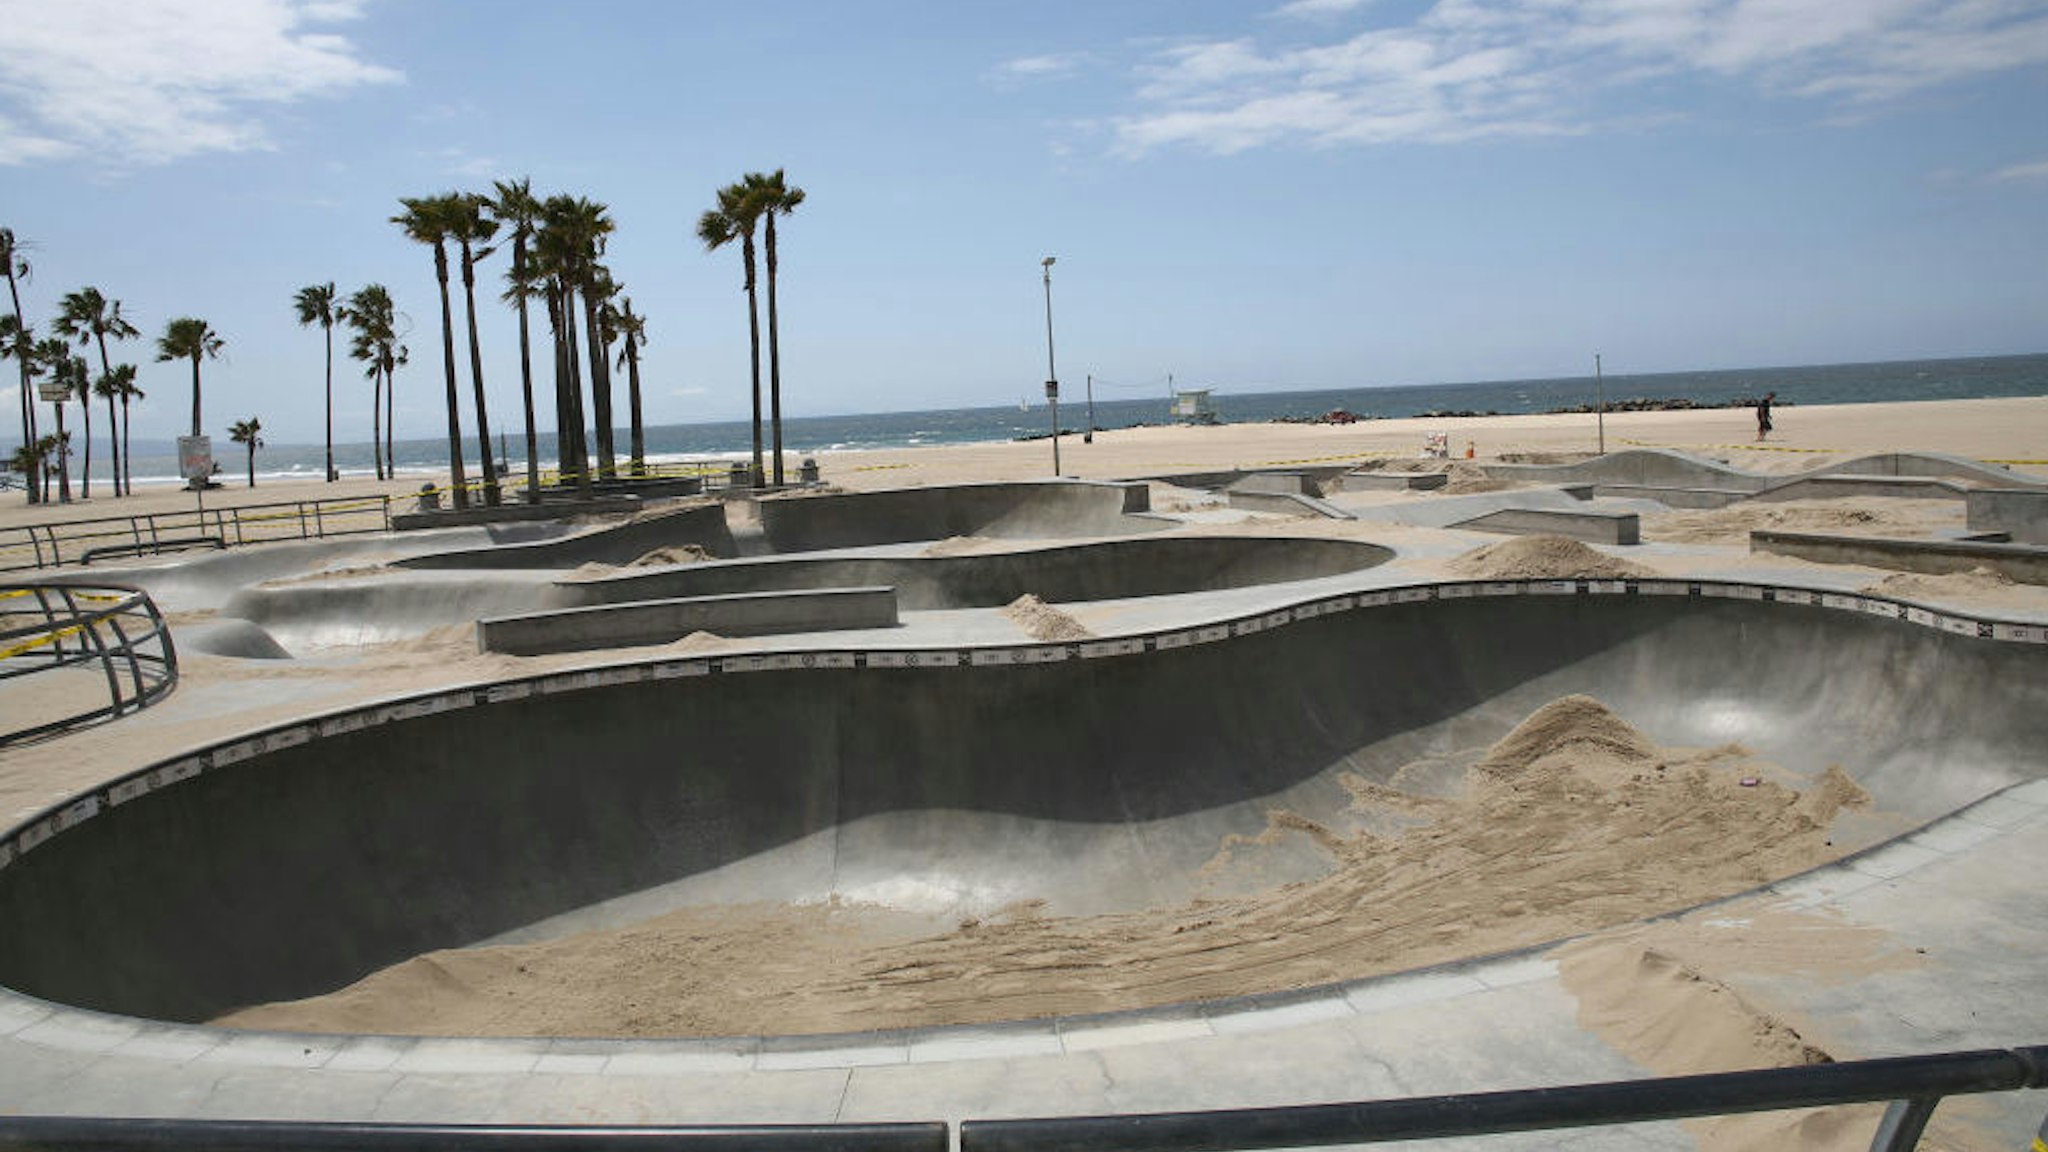 The Venice Beach skatepark is filled with sand to prevent people from using it during the coronavirus pandemic on April 18, 2020 in Venice, California. COVID-19 has spread to most countries around the world, claiming almost 159,000 lives and infecting over 2.3 million people.